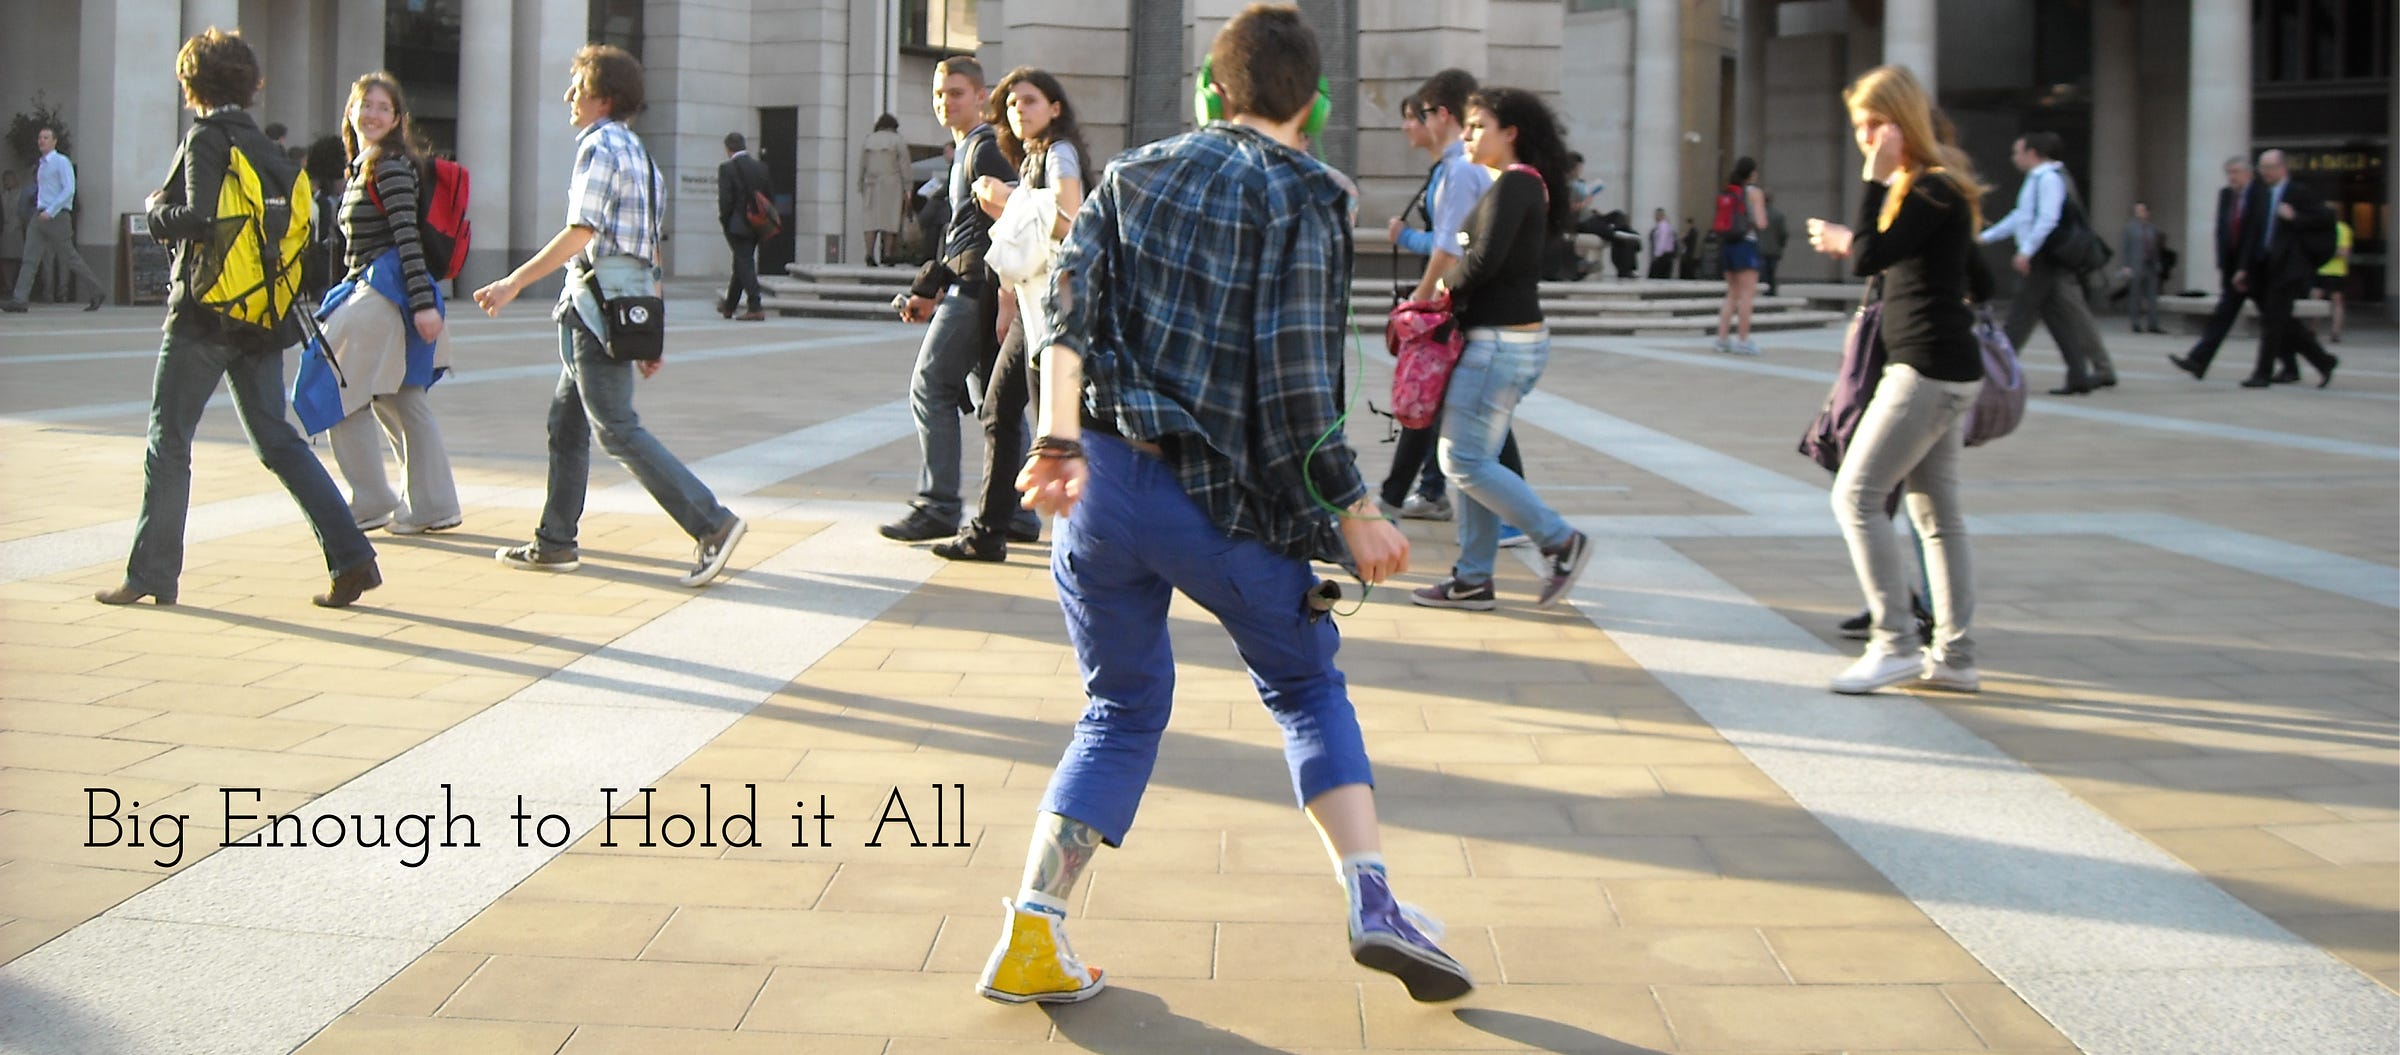 Photograph of the blog author dancing in a crowded public square. The author's back is to the camera. They are wearing a blue and black plaid shirt and blue capri pants. A tattoo shows on their left leg. On their feet are colourful hand painted canvas high tops. They have on bright green headphones. People walking past them in the background are glancing their way or looking forward in the direction they are walking. The title of the poem this image goes with, Big Enough to Hold it All, is in the bottom left corner of the image. 